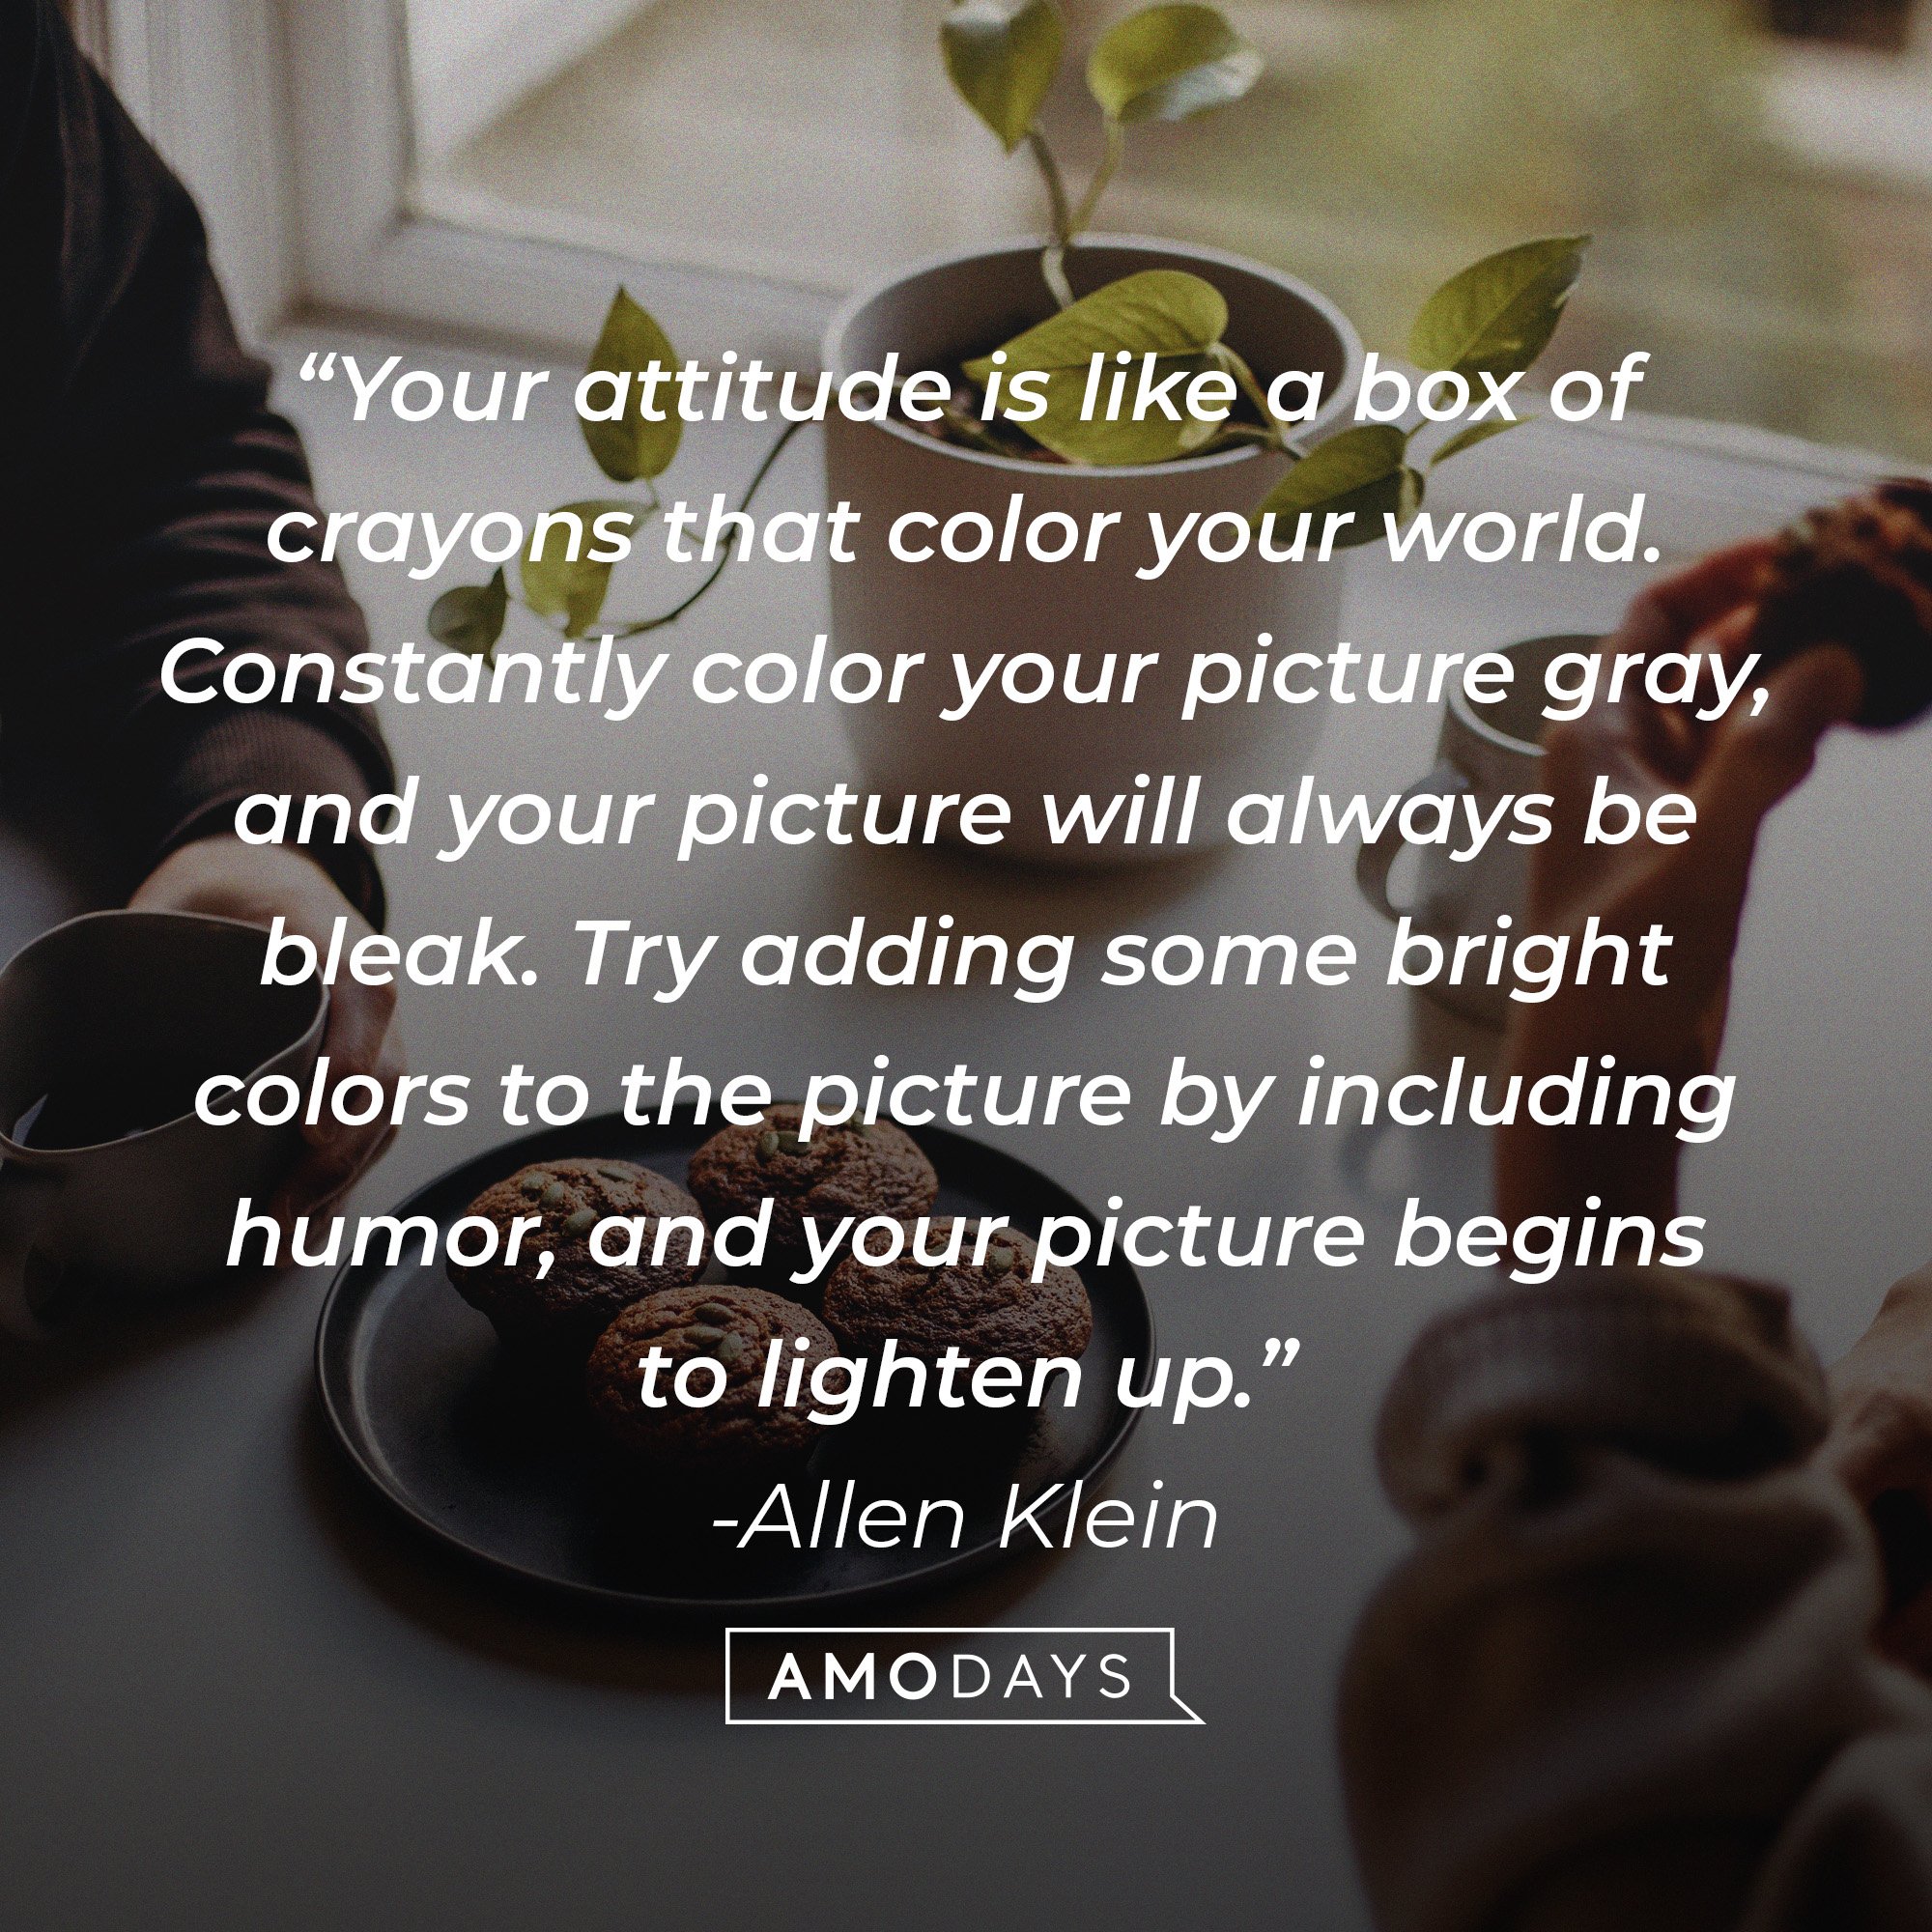 Allen Klein's quote: “Your attitude is like a box of crayons that color your world. Constantly color your picture gray, and your picture will always be bleak. Try adding some bright colors to the picture by including humor, and your picture begins to lighten up.” | Image: AmoDays 